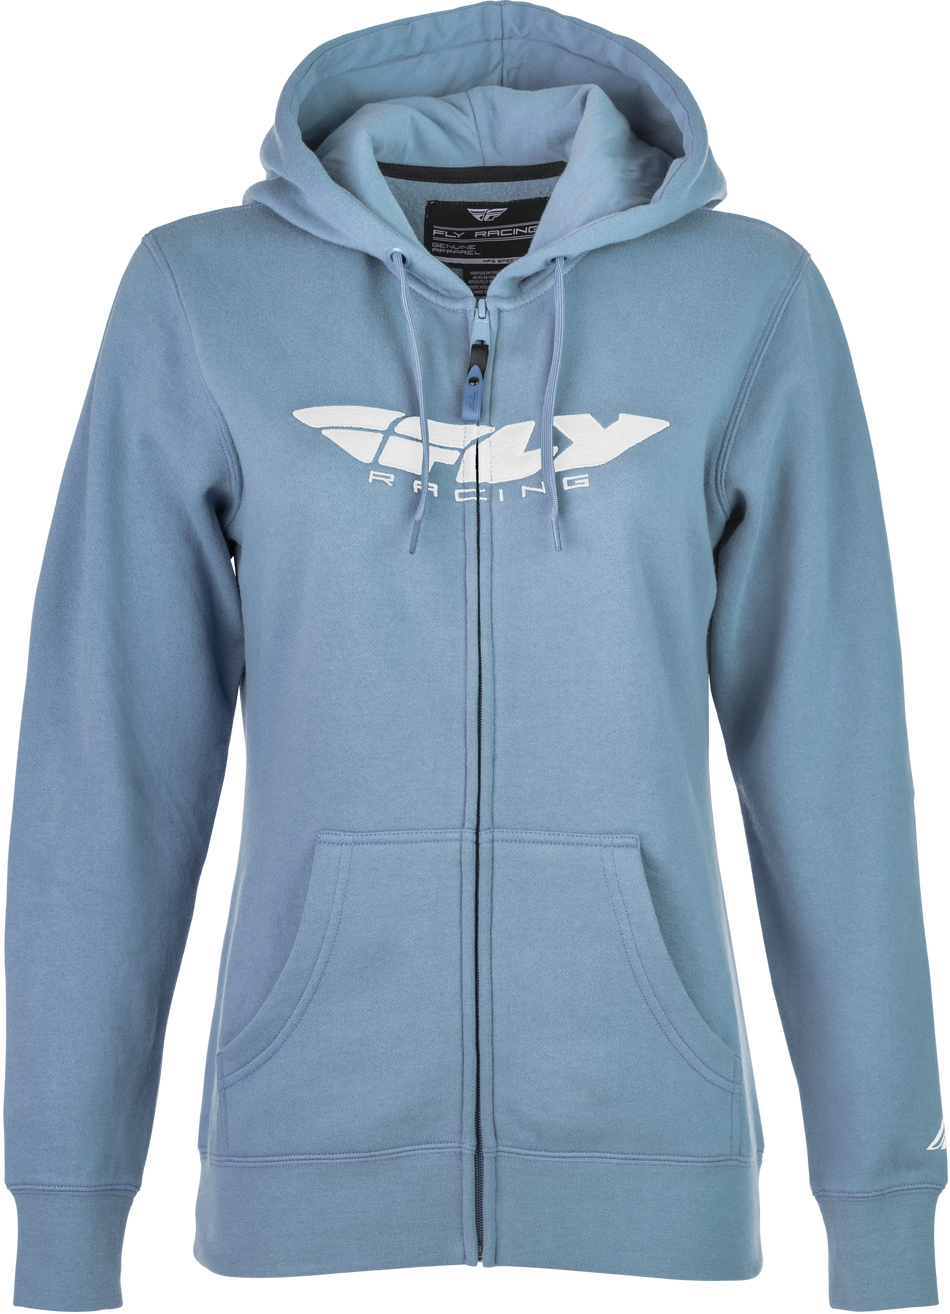 FLY RACING Women's Fly Corporate Zip Up Light Blue Md 358-0063M